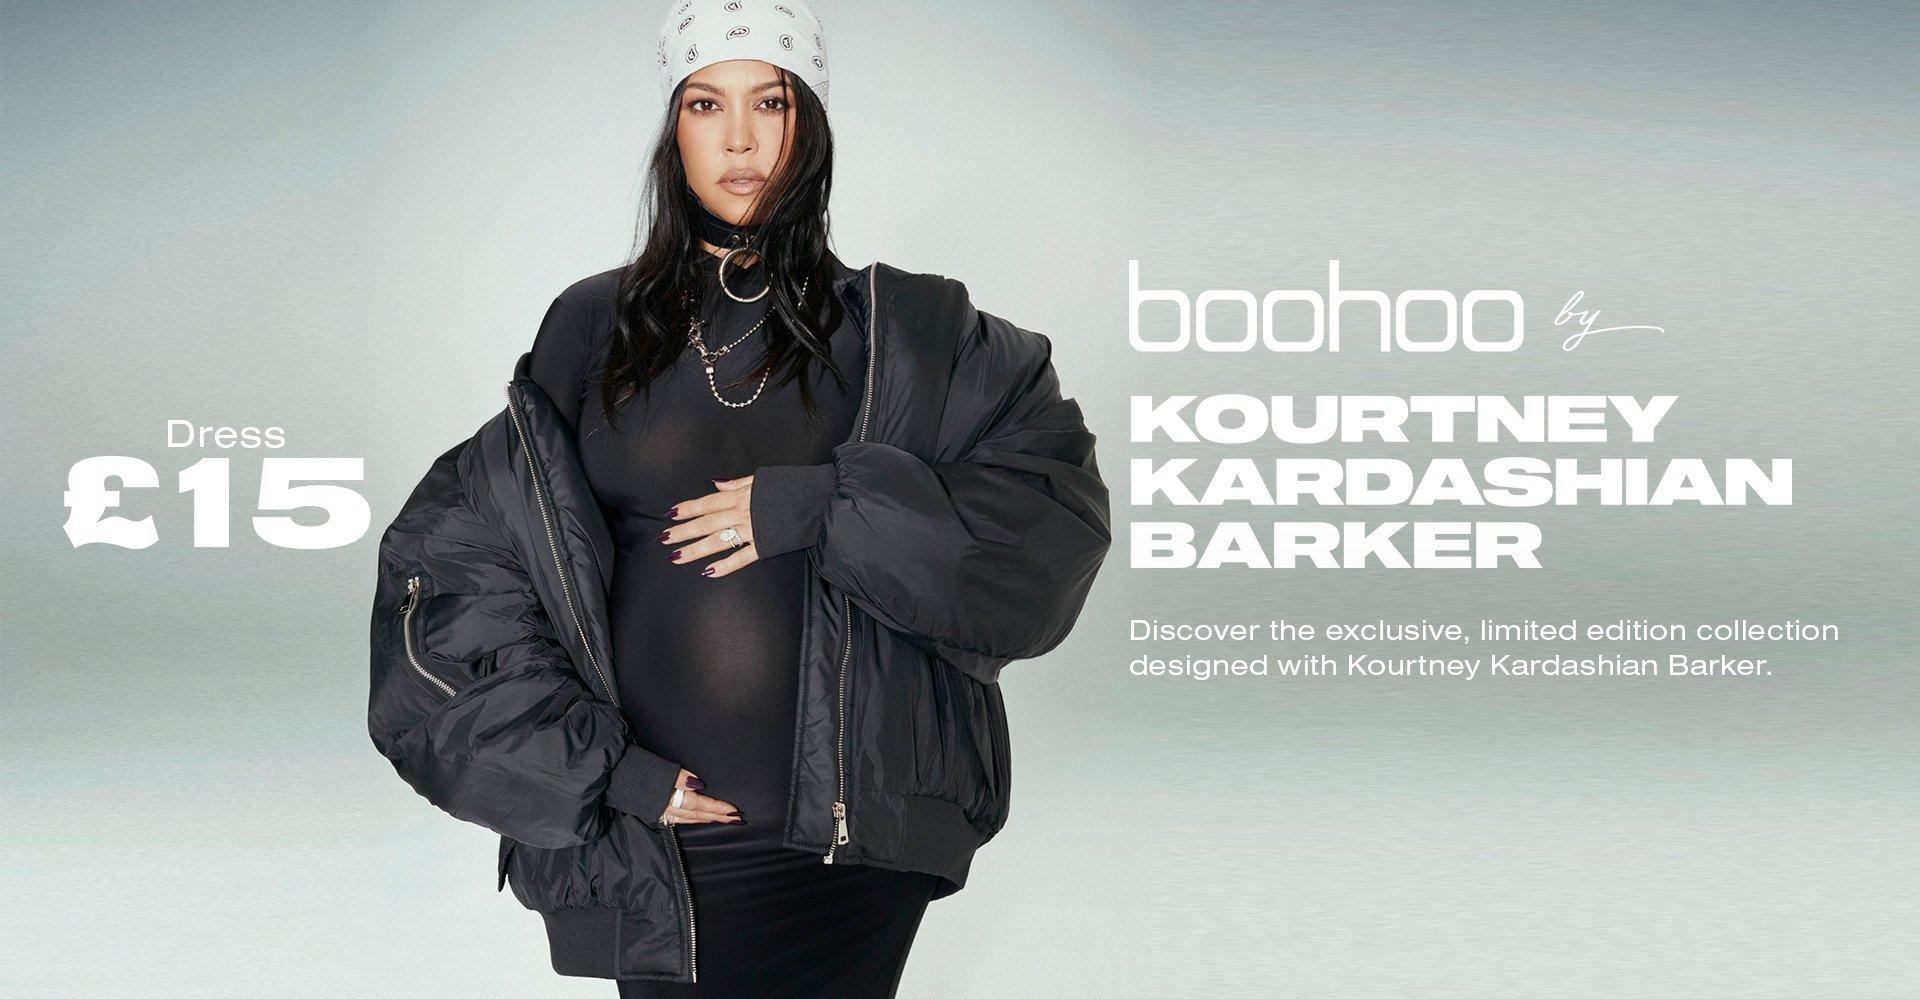 boohoo by KOURTNEY KARDASHIAN BARKER Discover the exclusive, limited edition collection designed with Kourtney Kardashian Barker TRENCH £25